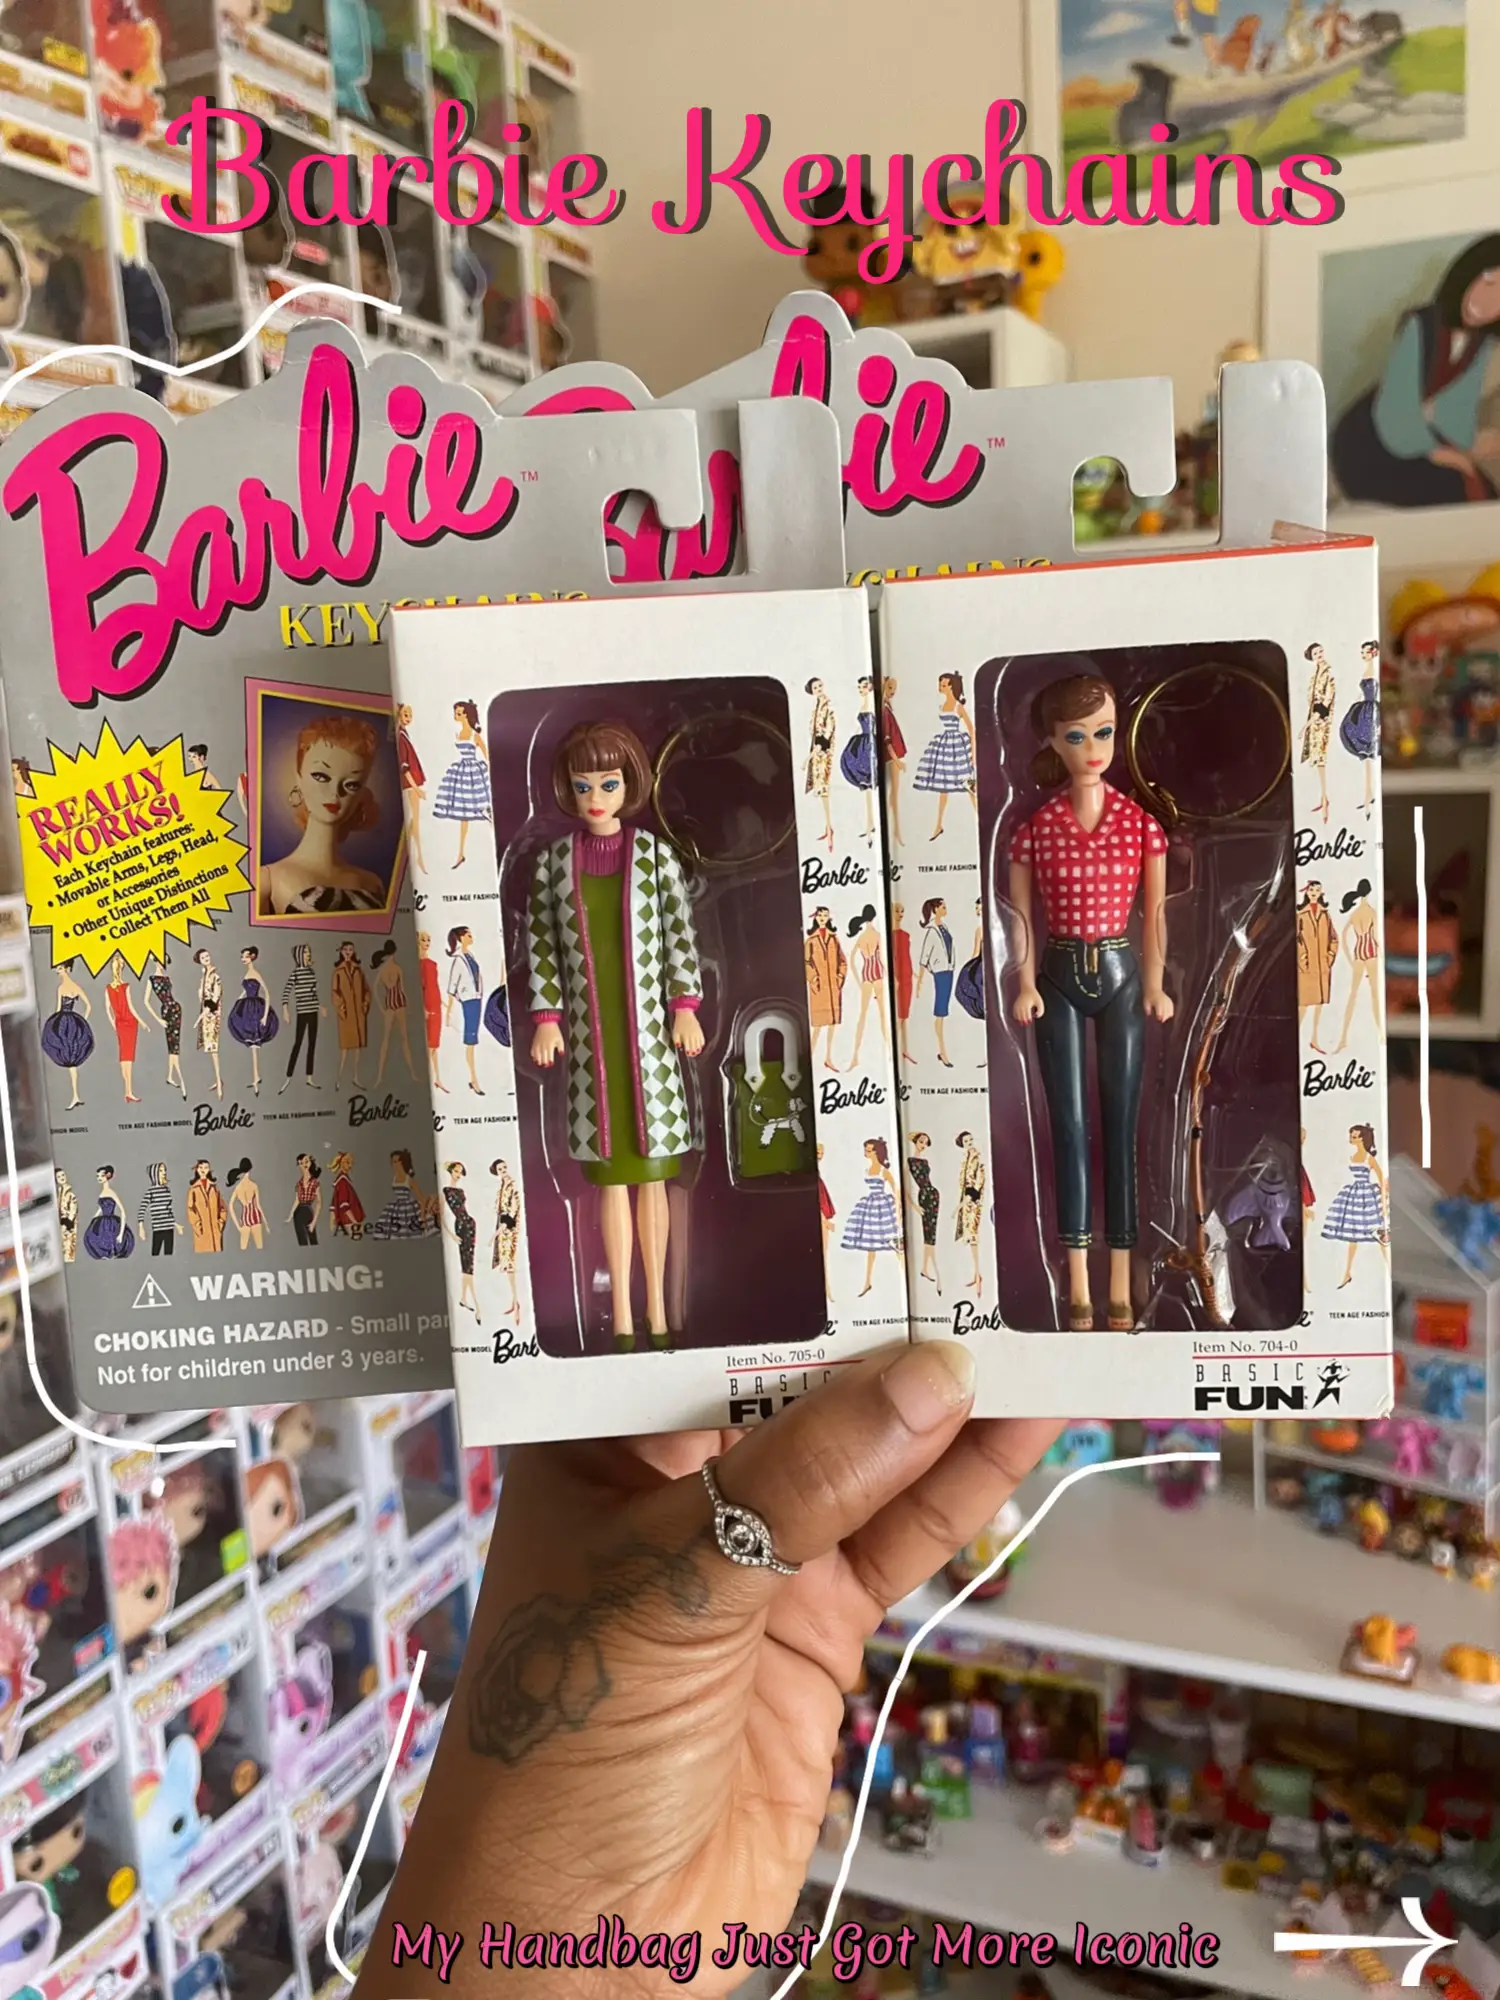 Join the Barbie craze. The new Zara Barbie collection is now in stores! ♥